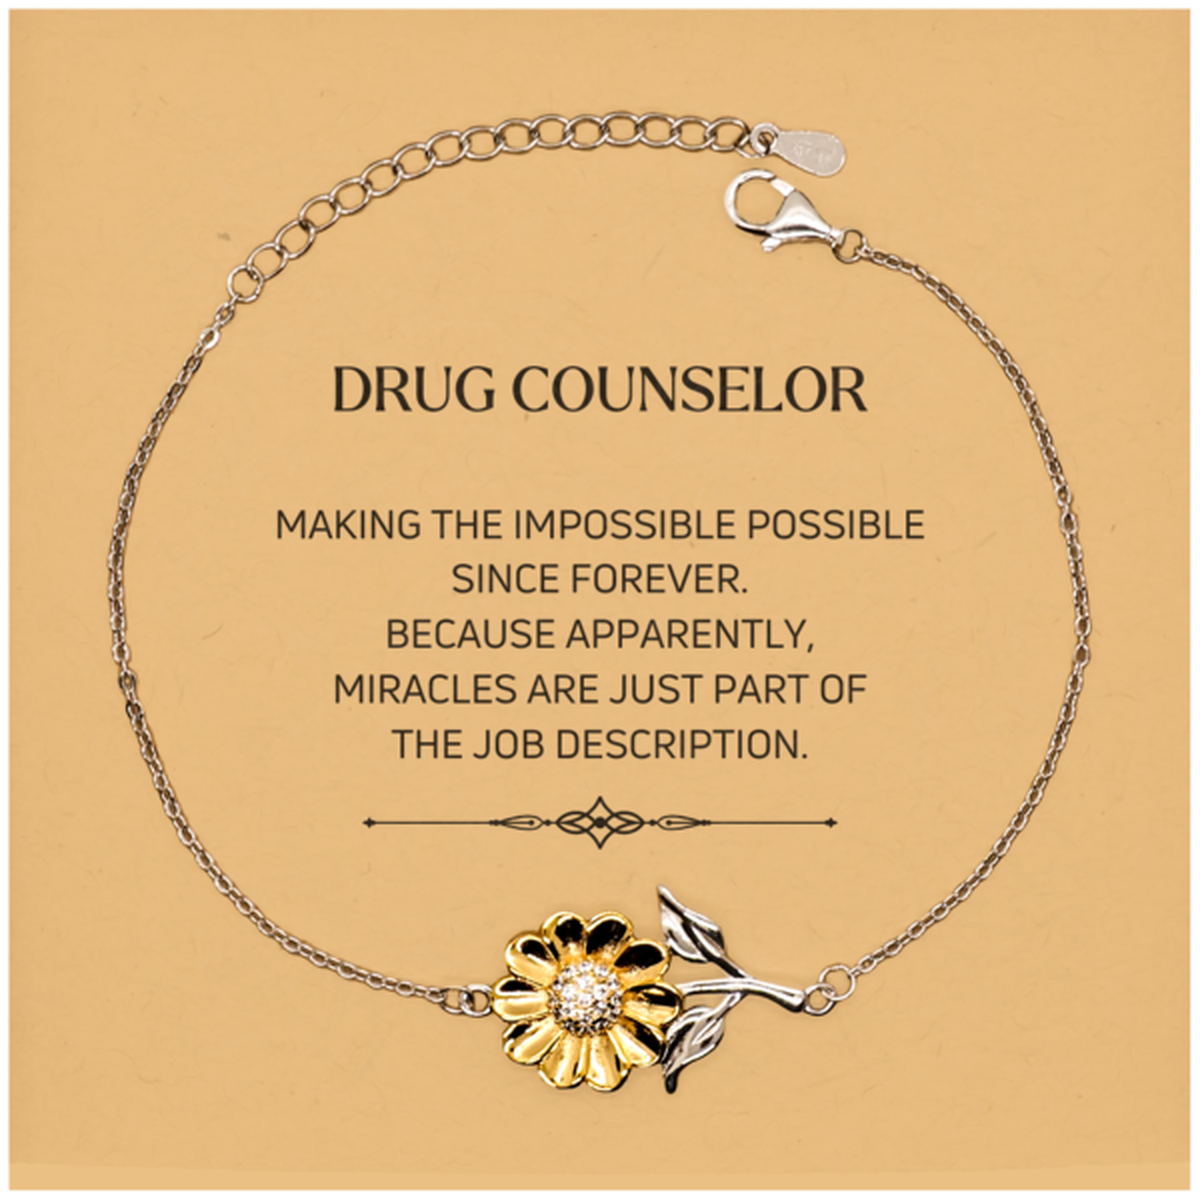 Funny Drug Counselor Gifts, Miracles are just part of the job description, Inspirational Birthday Christmas Sunflower Bracelet For Drug Counselor, Men, Women, Coworkers, Friends, Boss